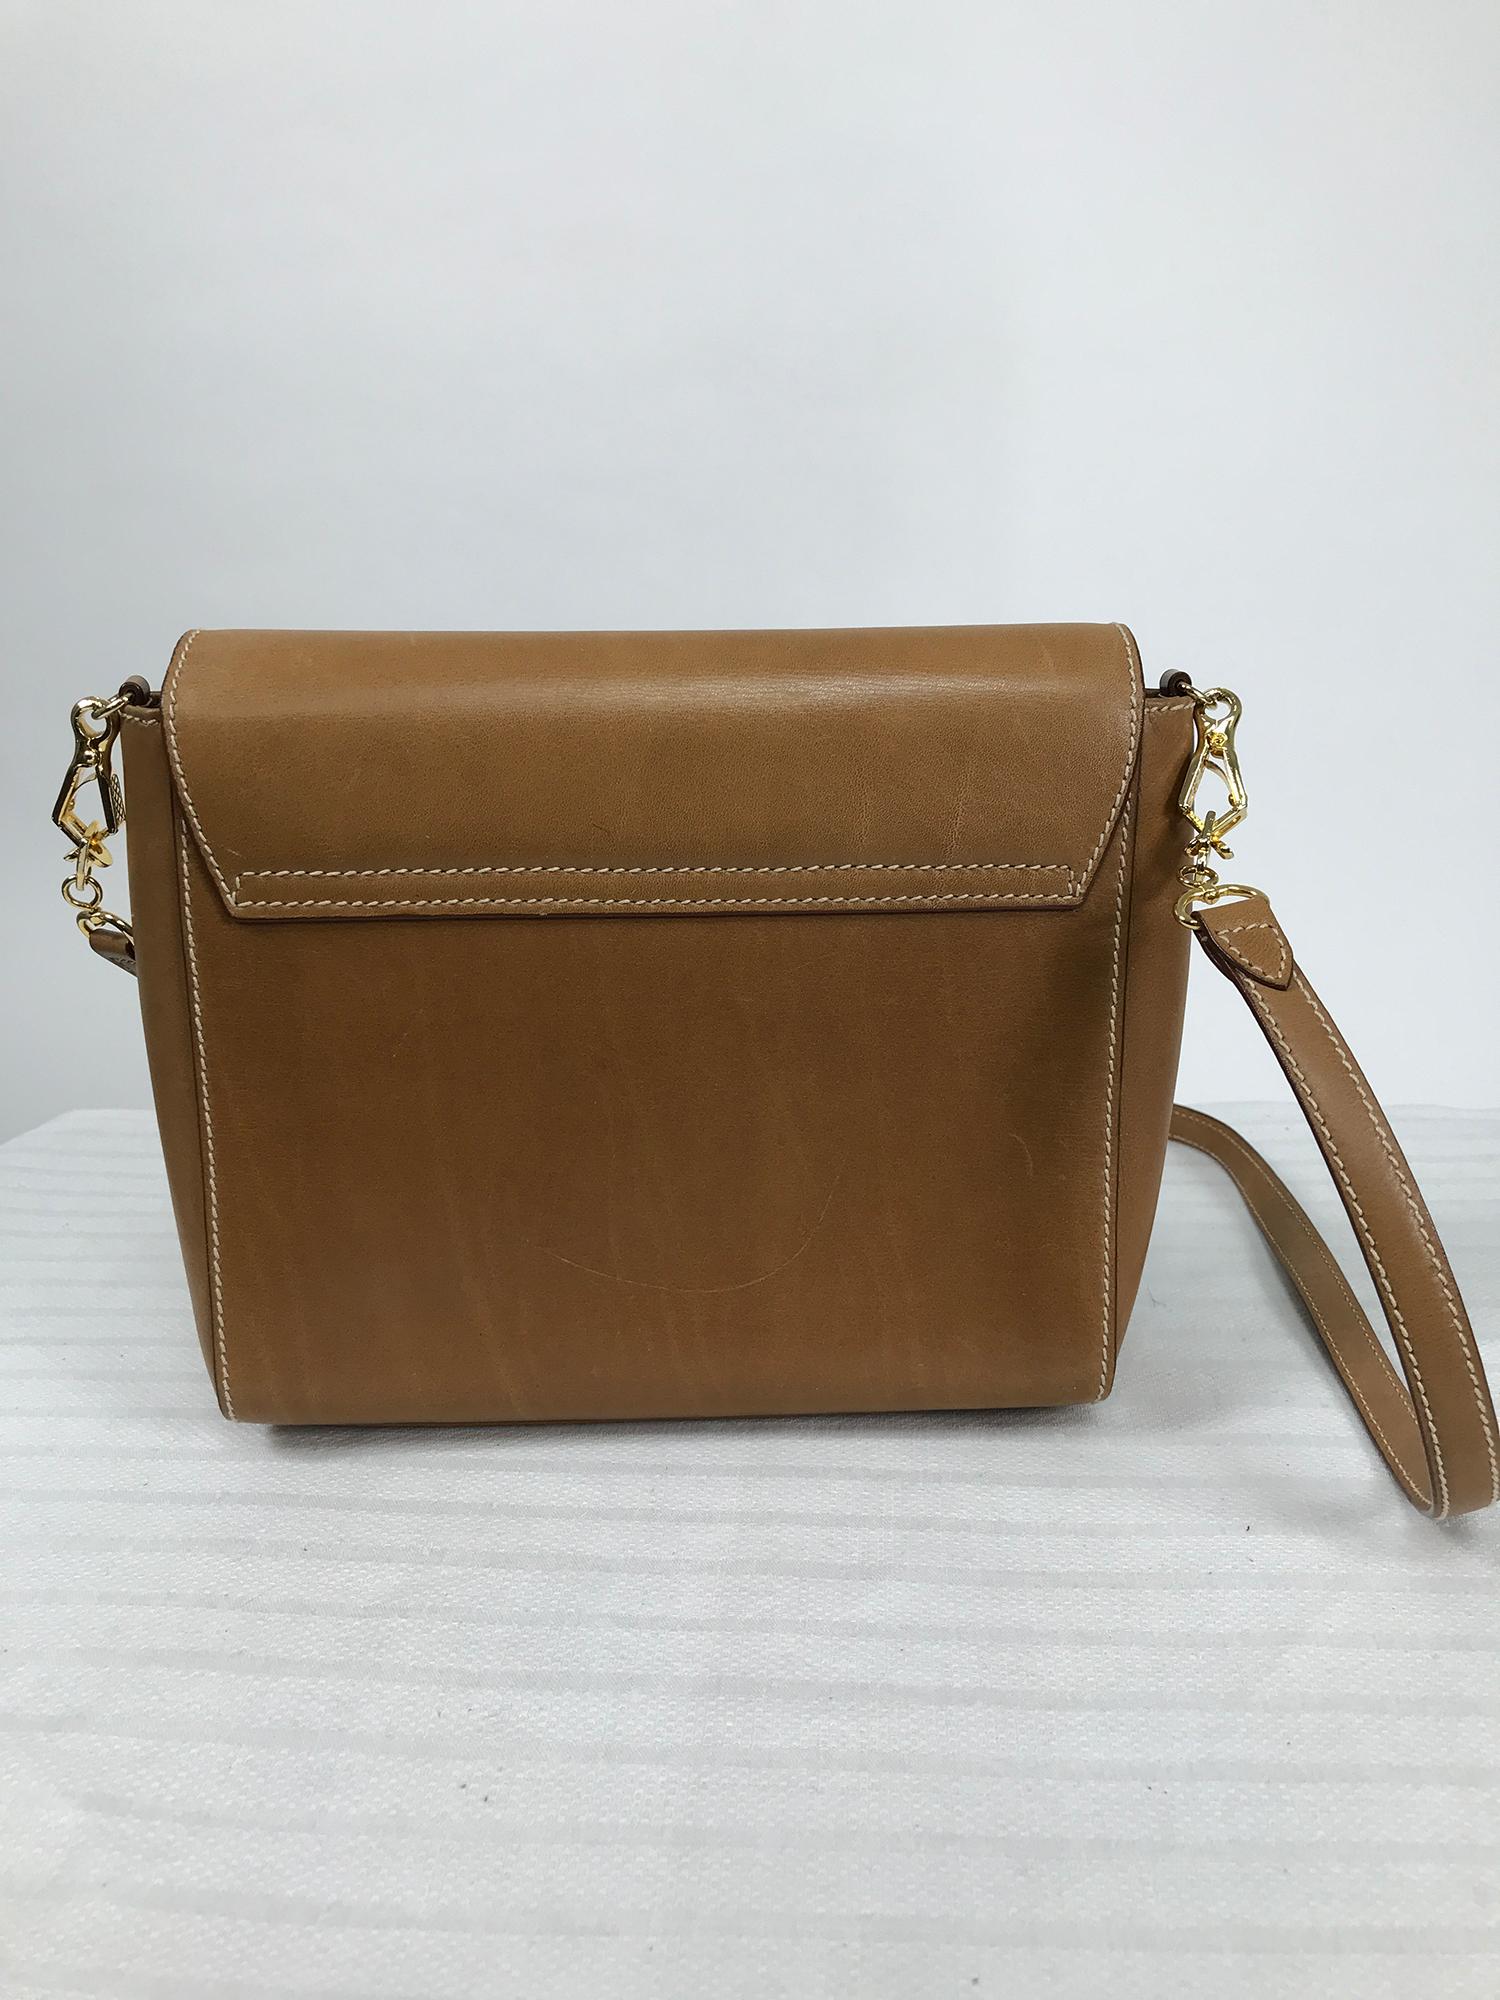 Prada flap front saddle tan leather shoulder bag with gold hardware. Top stitched in off white, the bag has a removable shoulder strap. Closes at the front with a press lock clasp the top marked Prada. The interior has a back zipper compartment,